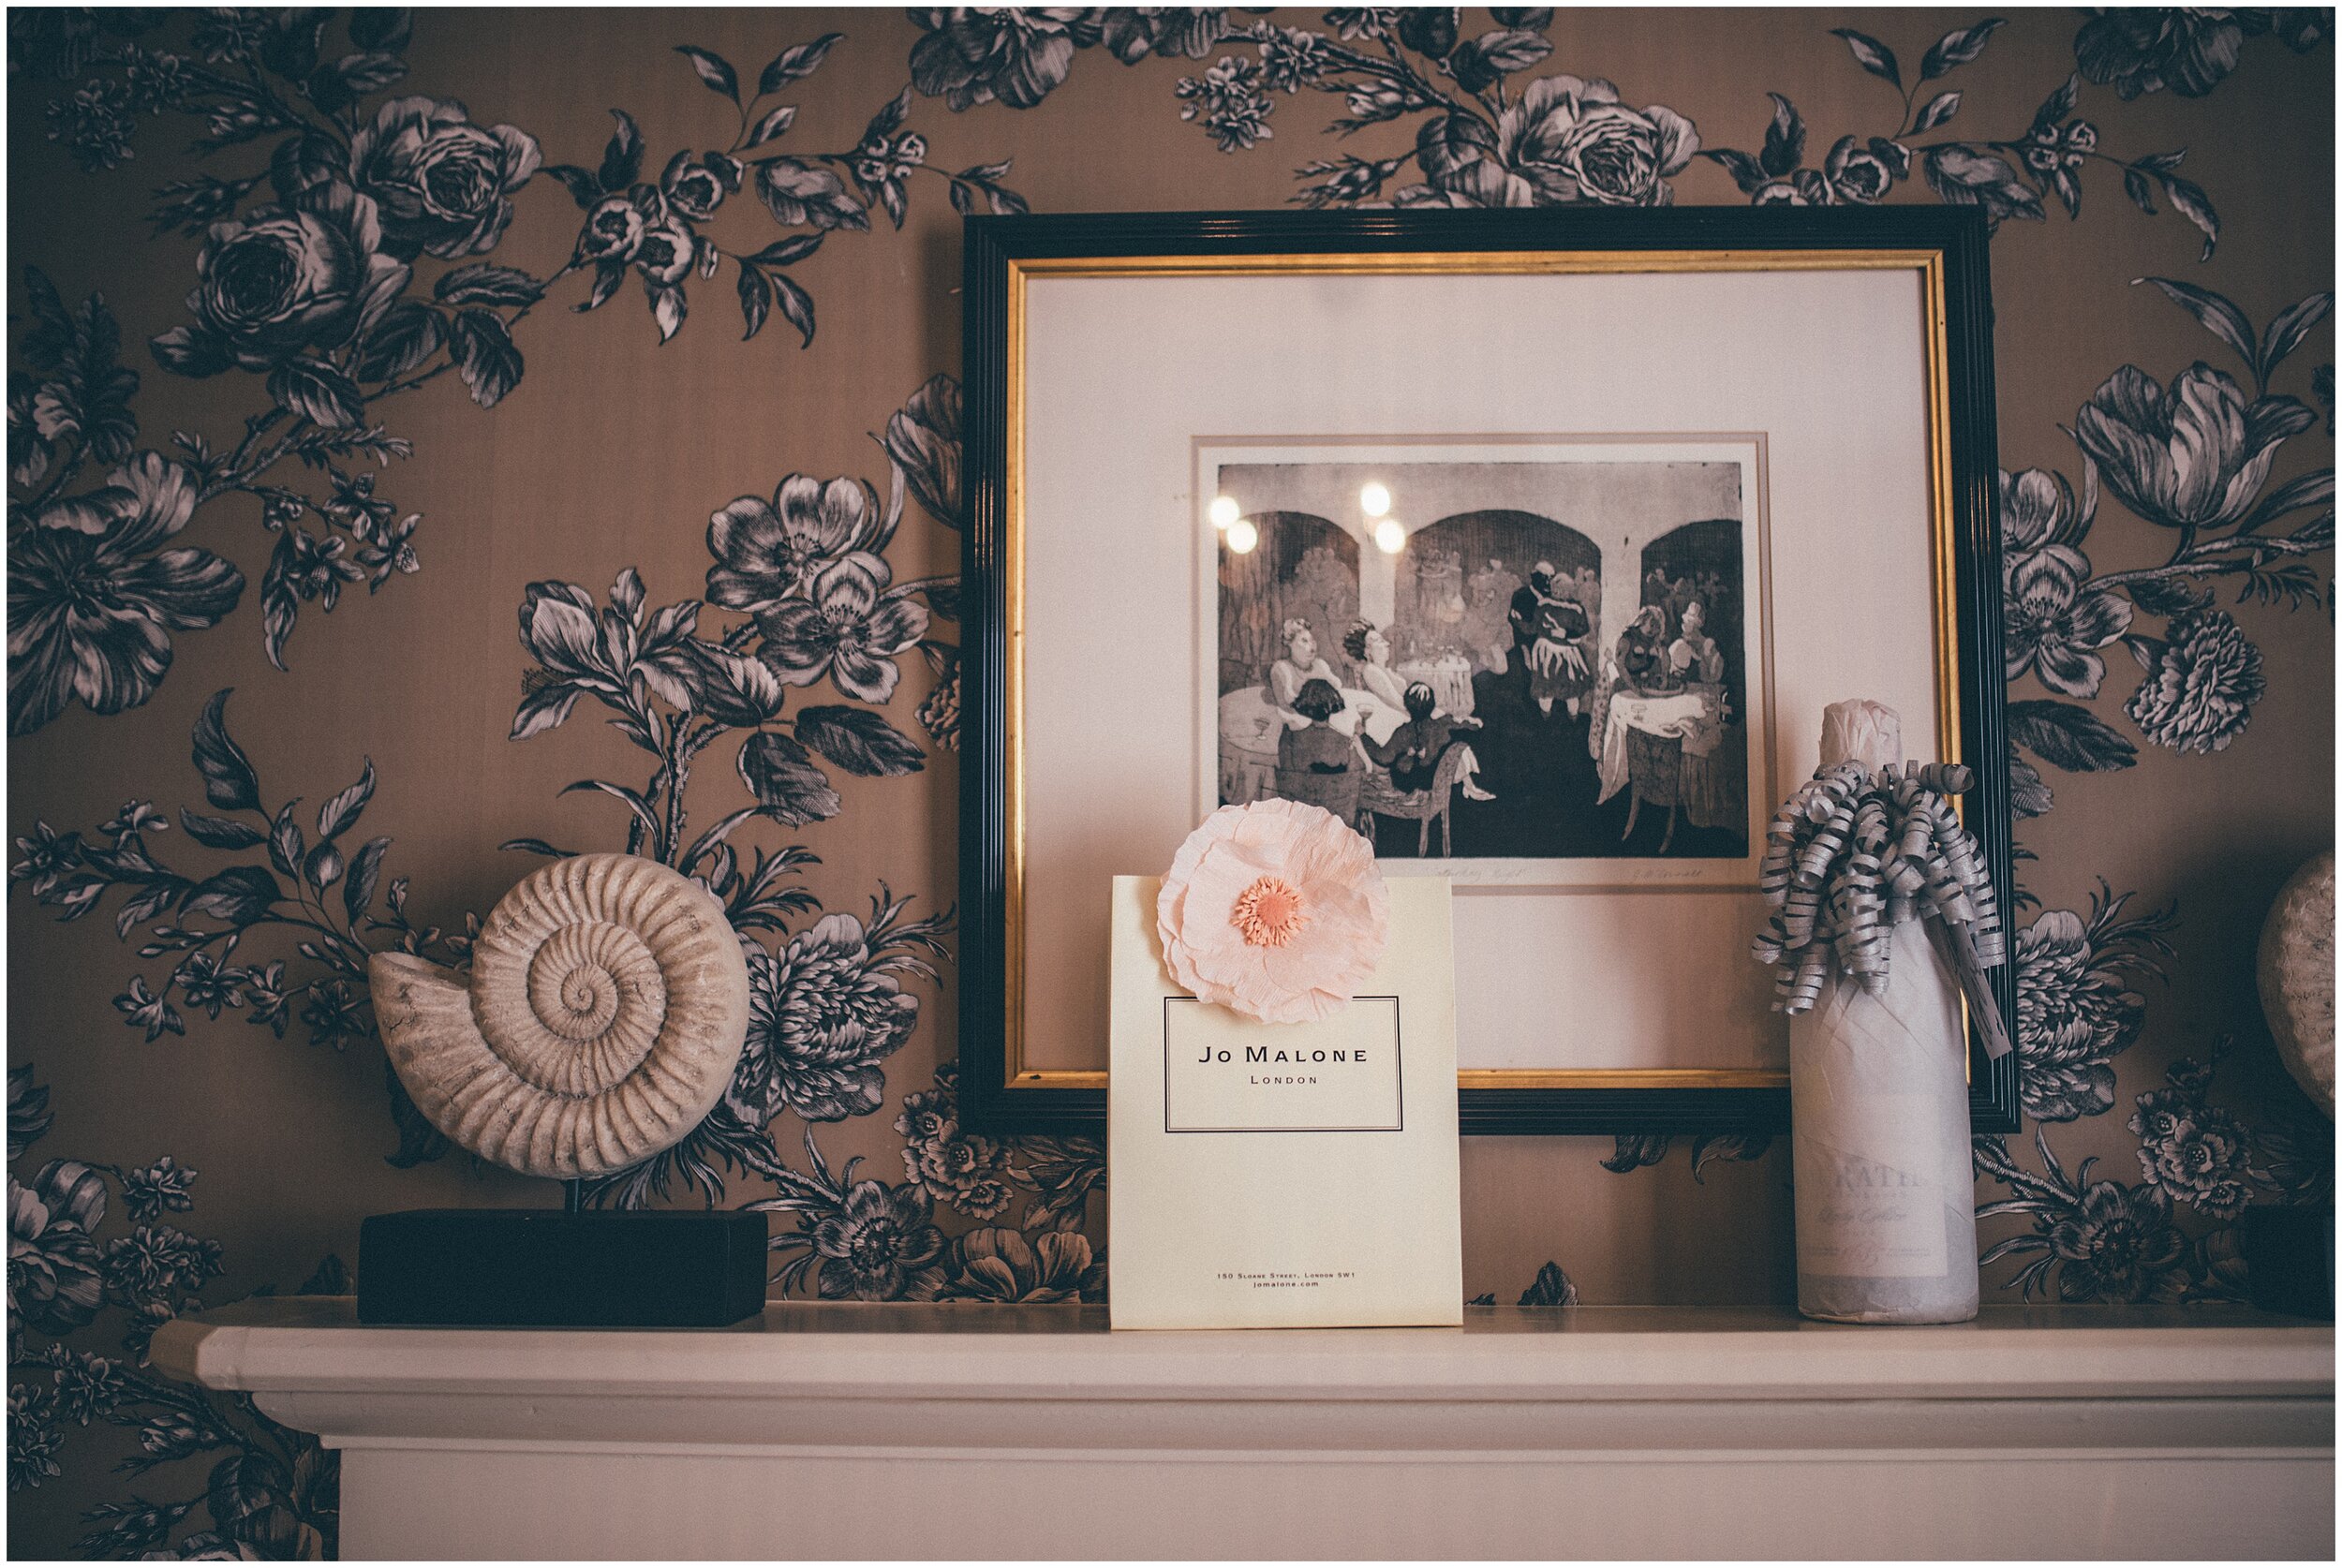 Bridal Jo Malone perfume on the mantle piece at her accommodation.